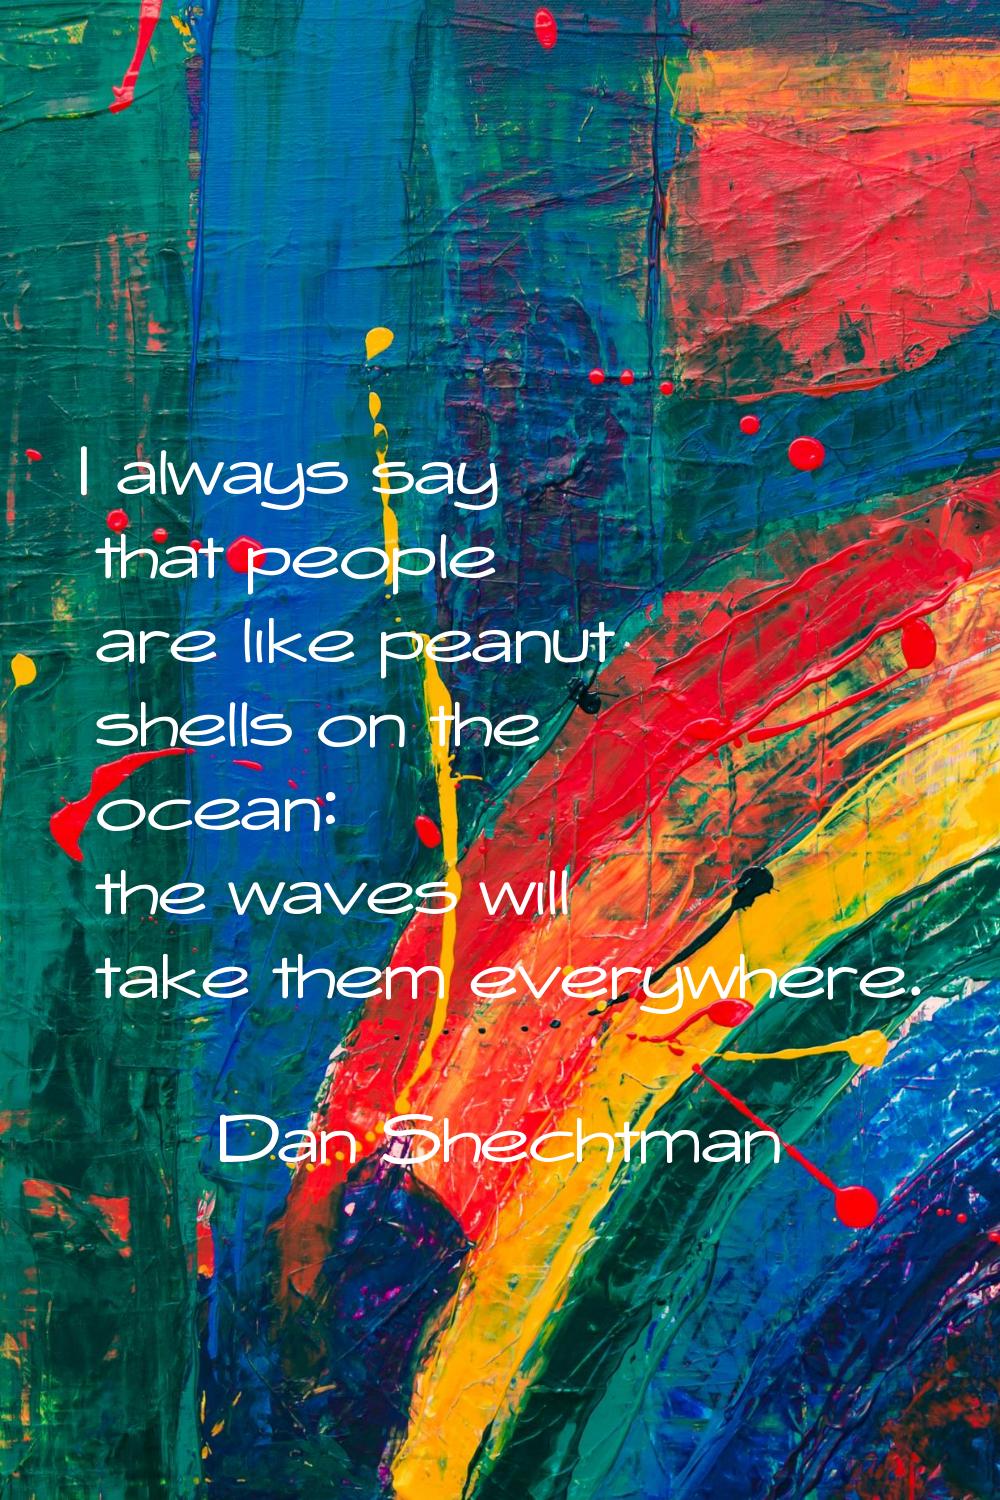 I always say that people are like peanut shells on the ocean: the waves will take them everywhere.